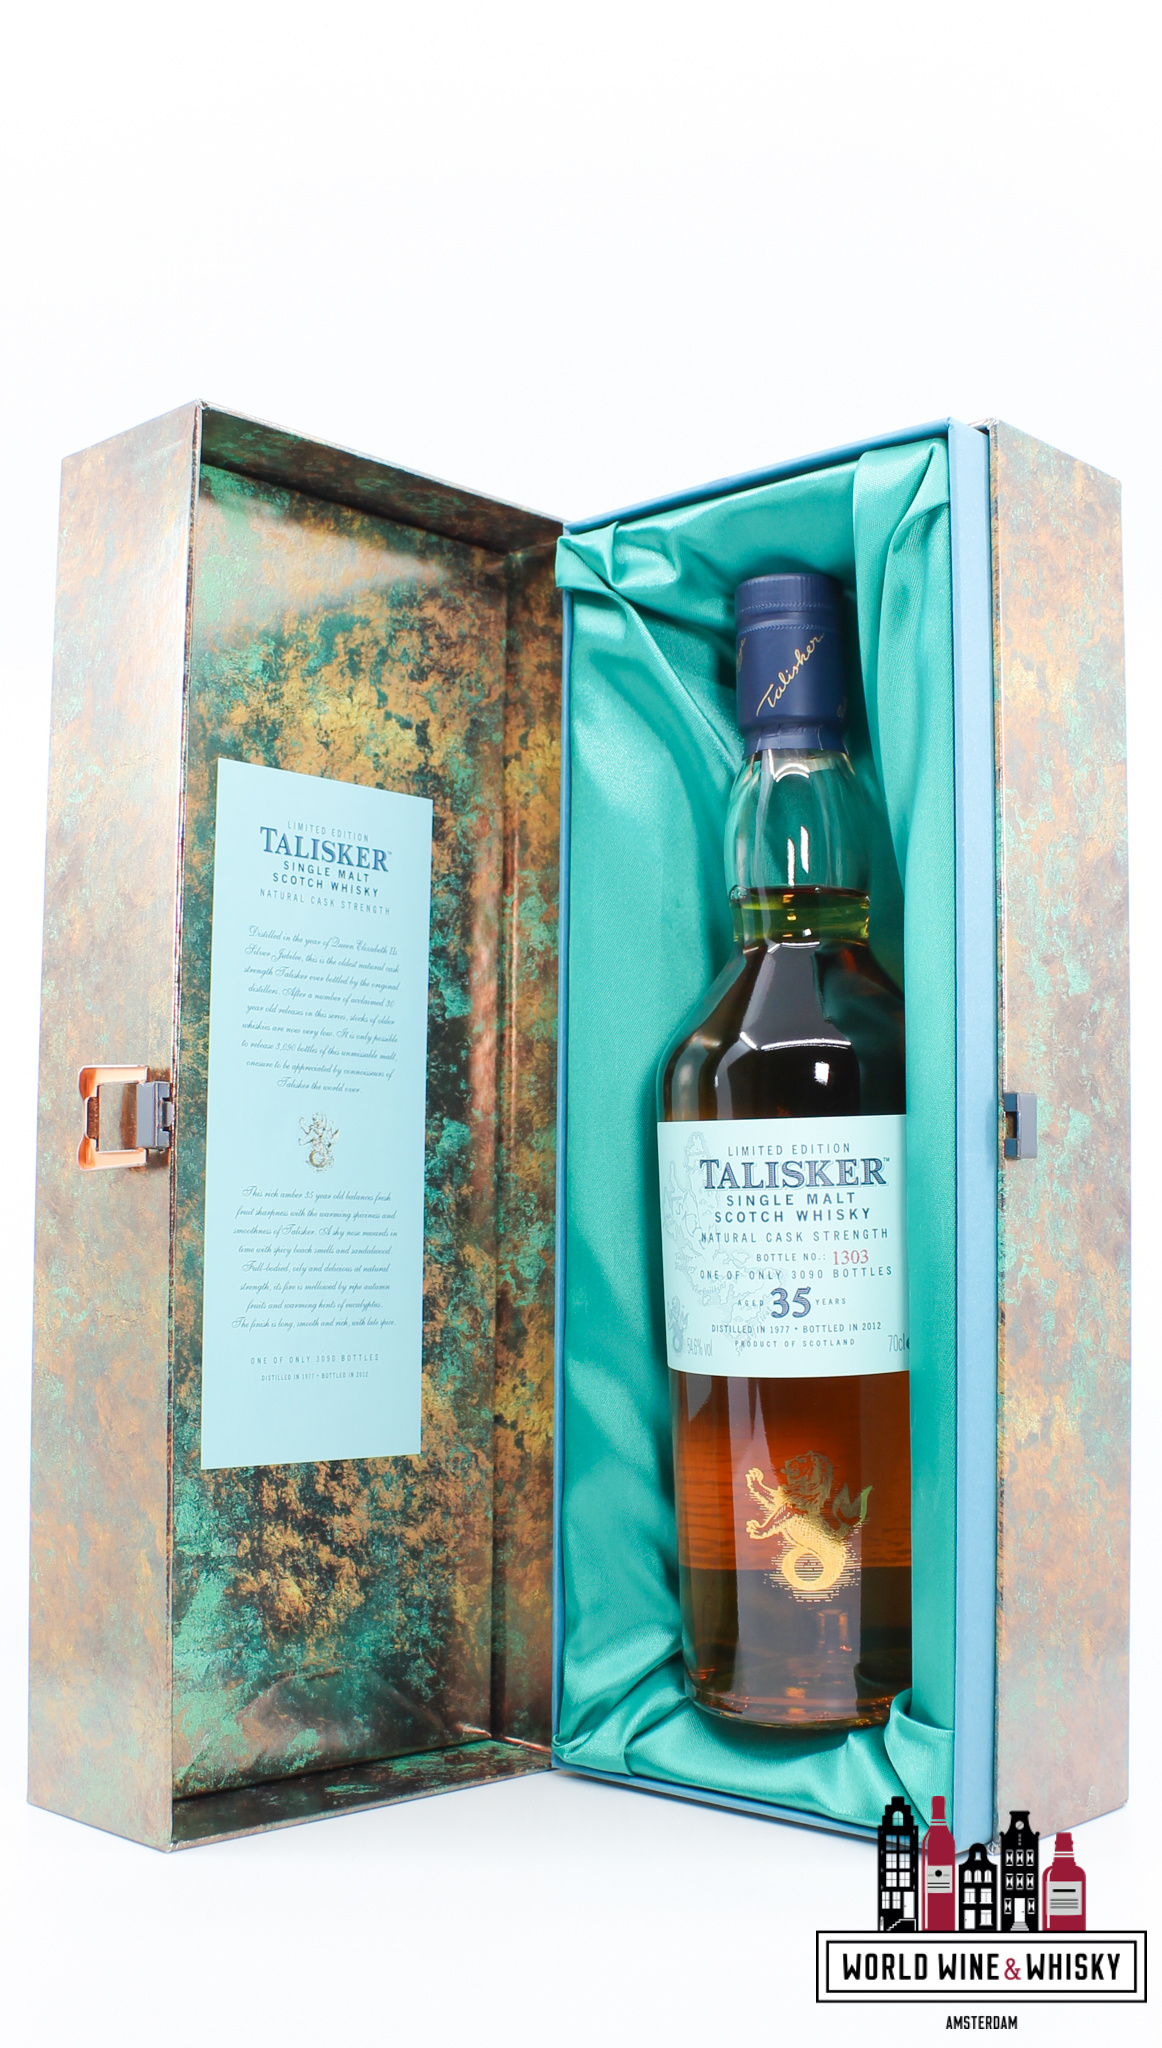 Talisker Talisker 35 Years Old 1977 2012 - Diageo Special Releases 2012 - Limited Edition 54.6% (1 of 3090)